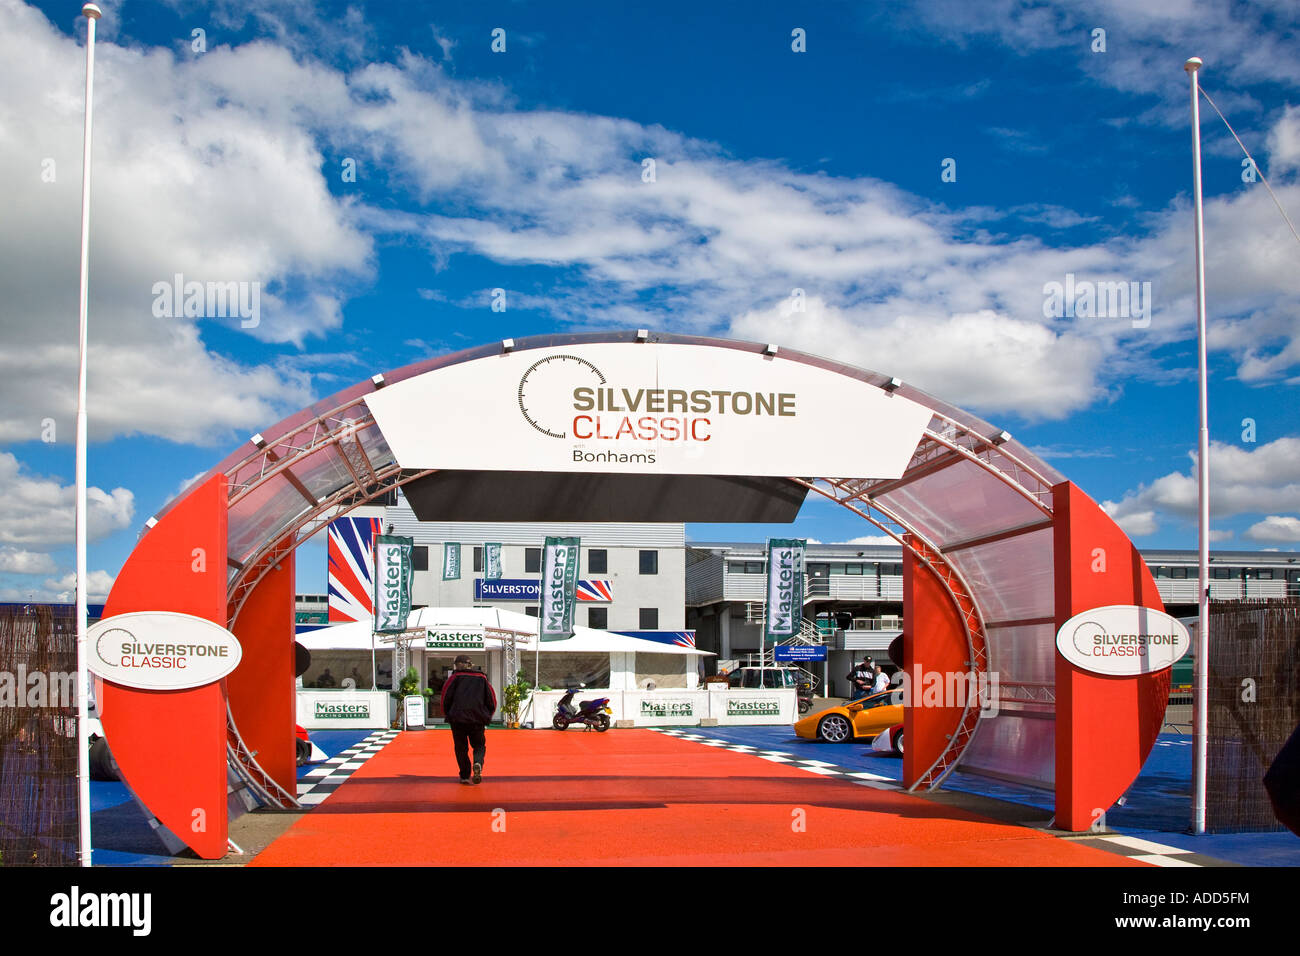 Suite Hospitality red carpet a Silverstone classic motor racing circuito. 2007 Foto Stock